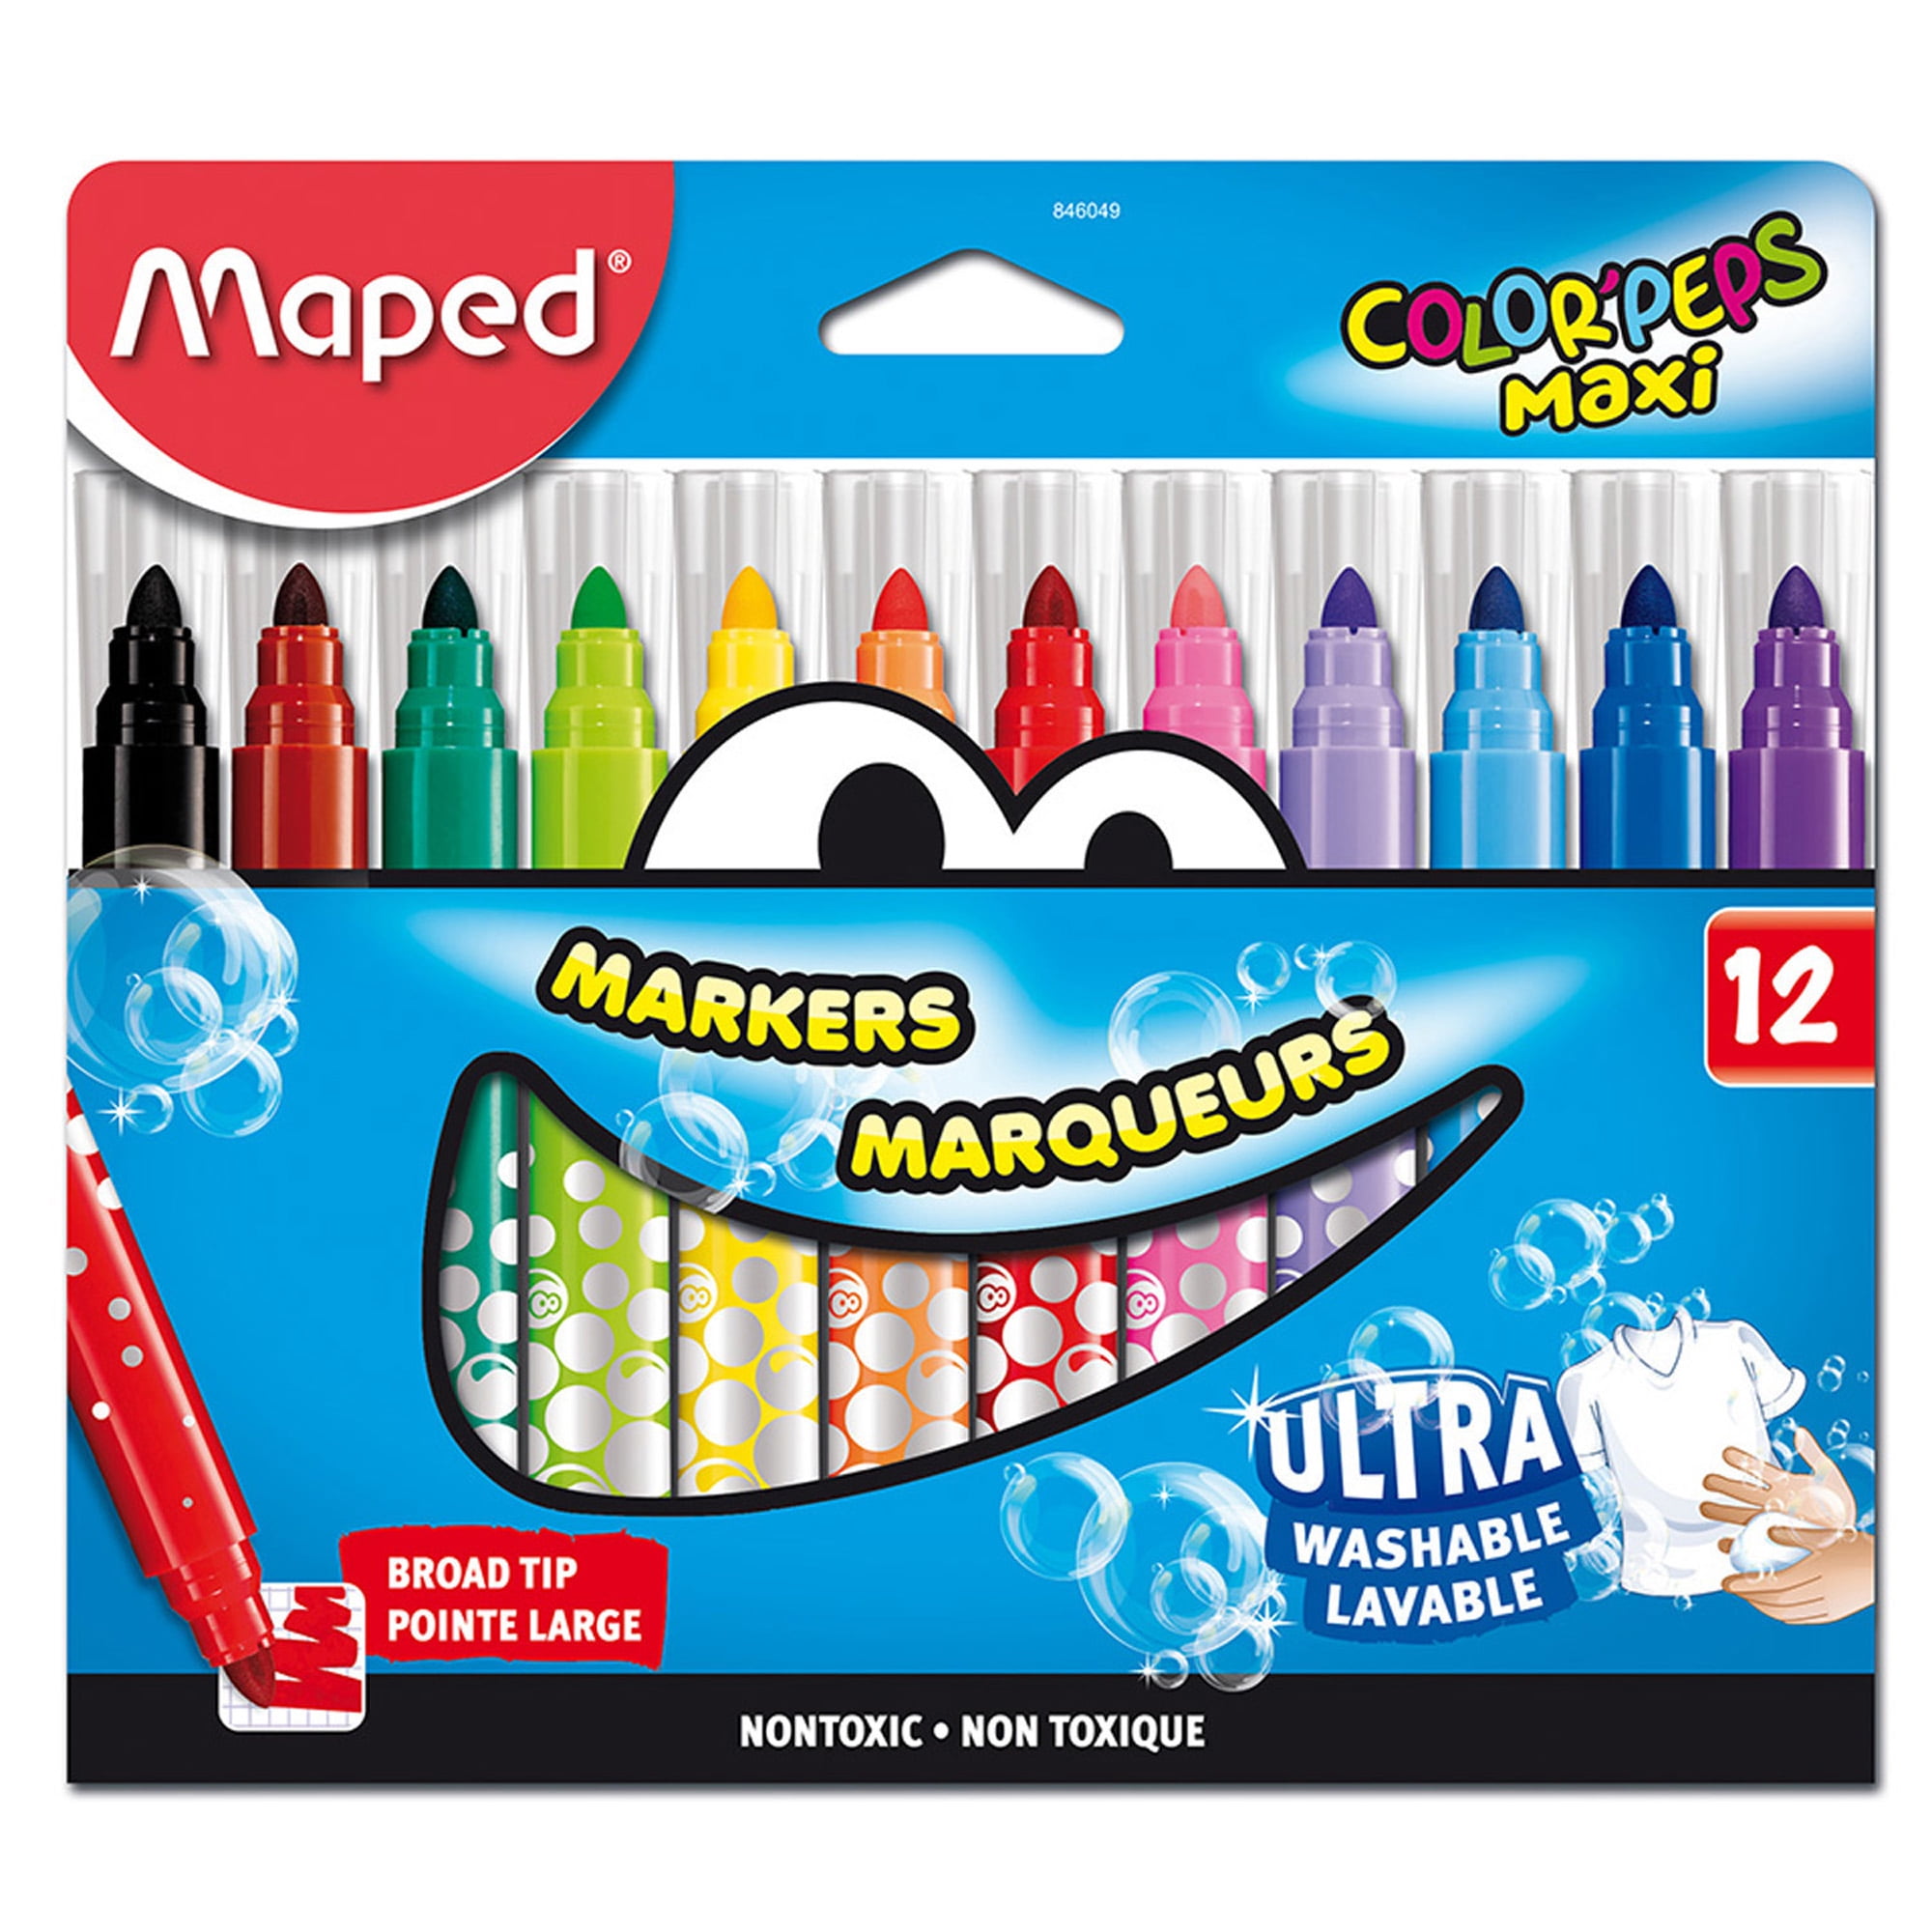 maped-ultra-washable-broad-tip-markers-12-per-pack-3-packs-walmart